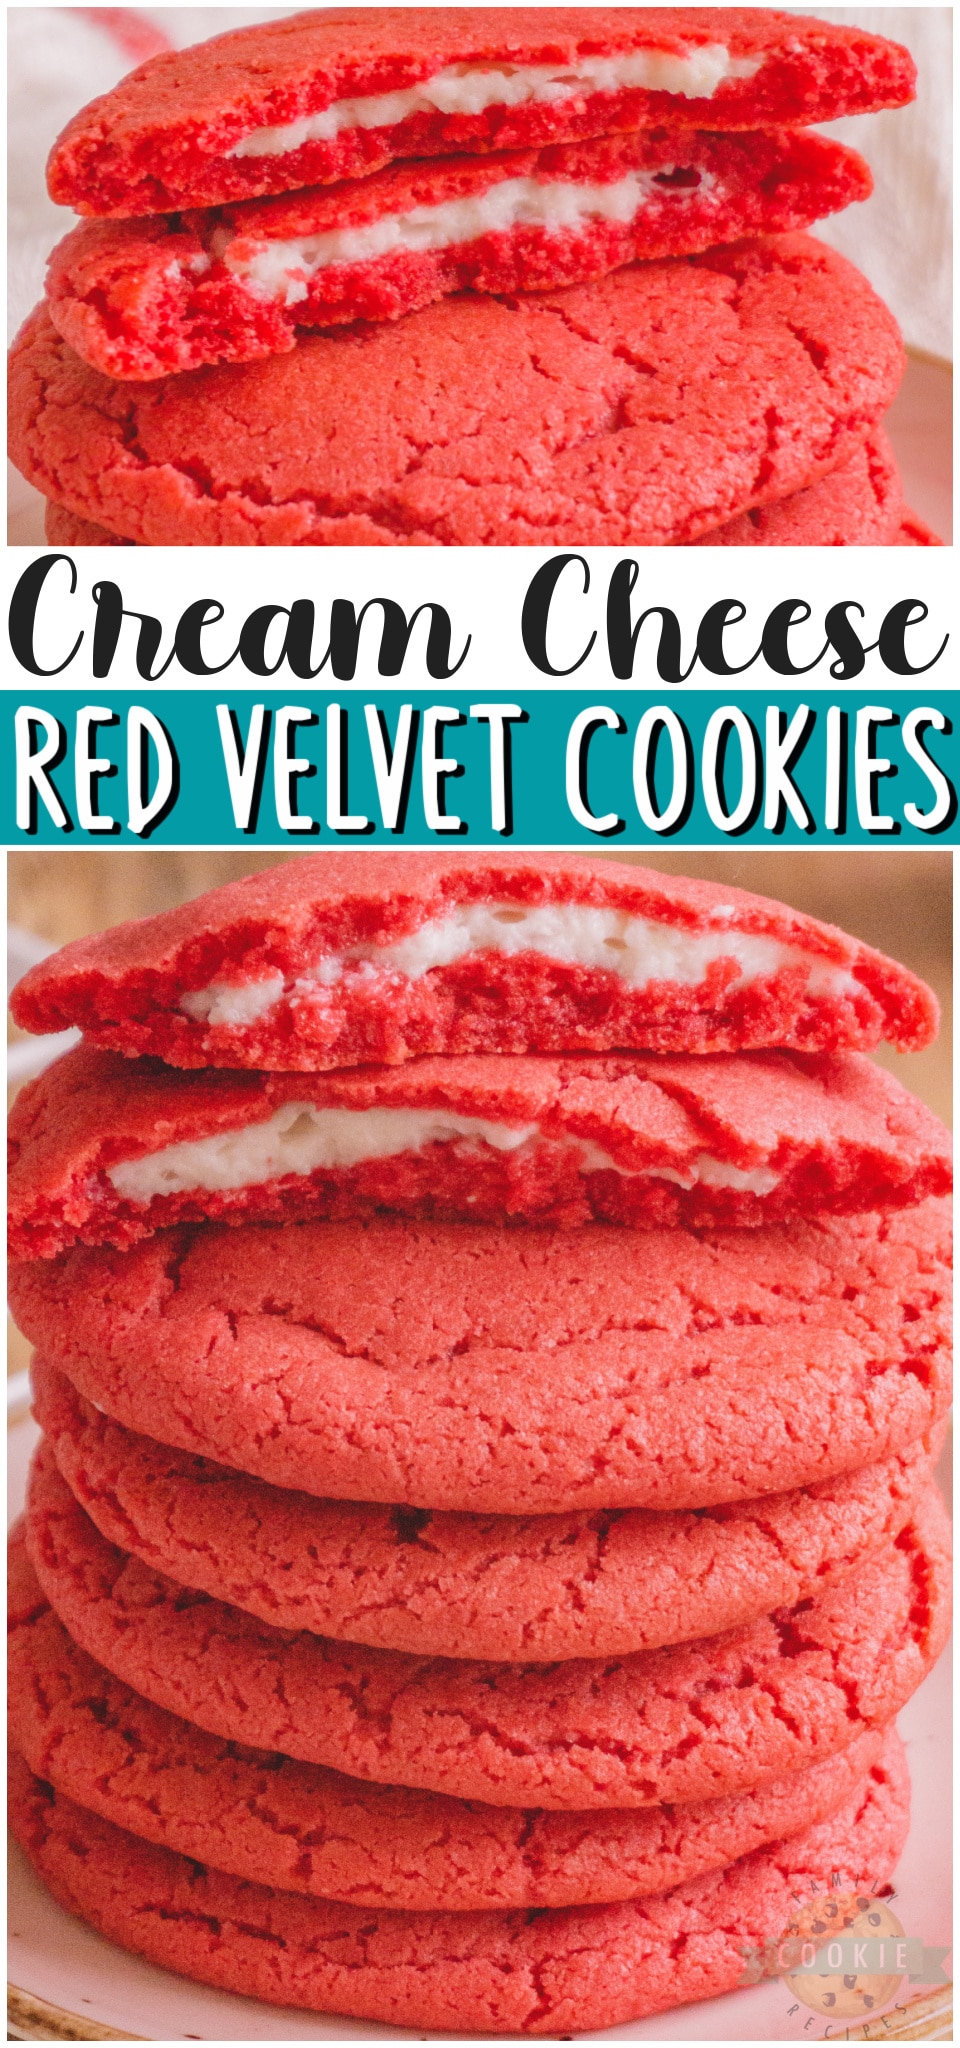 Cream Cheese red velvet cookies are soft & rich, vibrant red cookies with a fun surprise in the middle! Perfect Inside Out Red Velvet Cookies for Valentine's Day or just because!